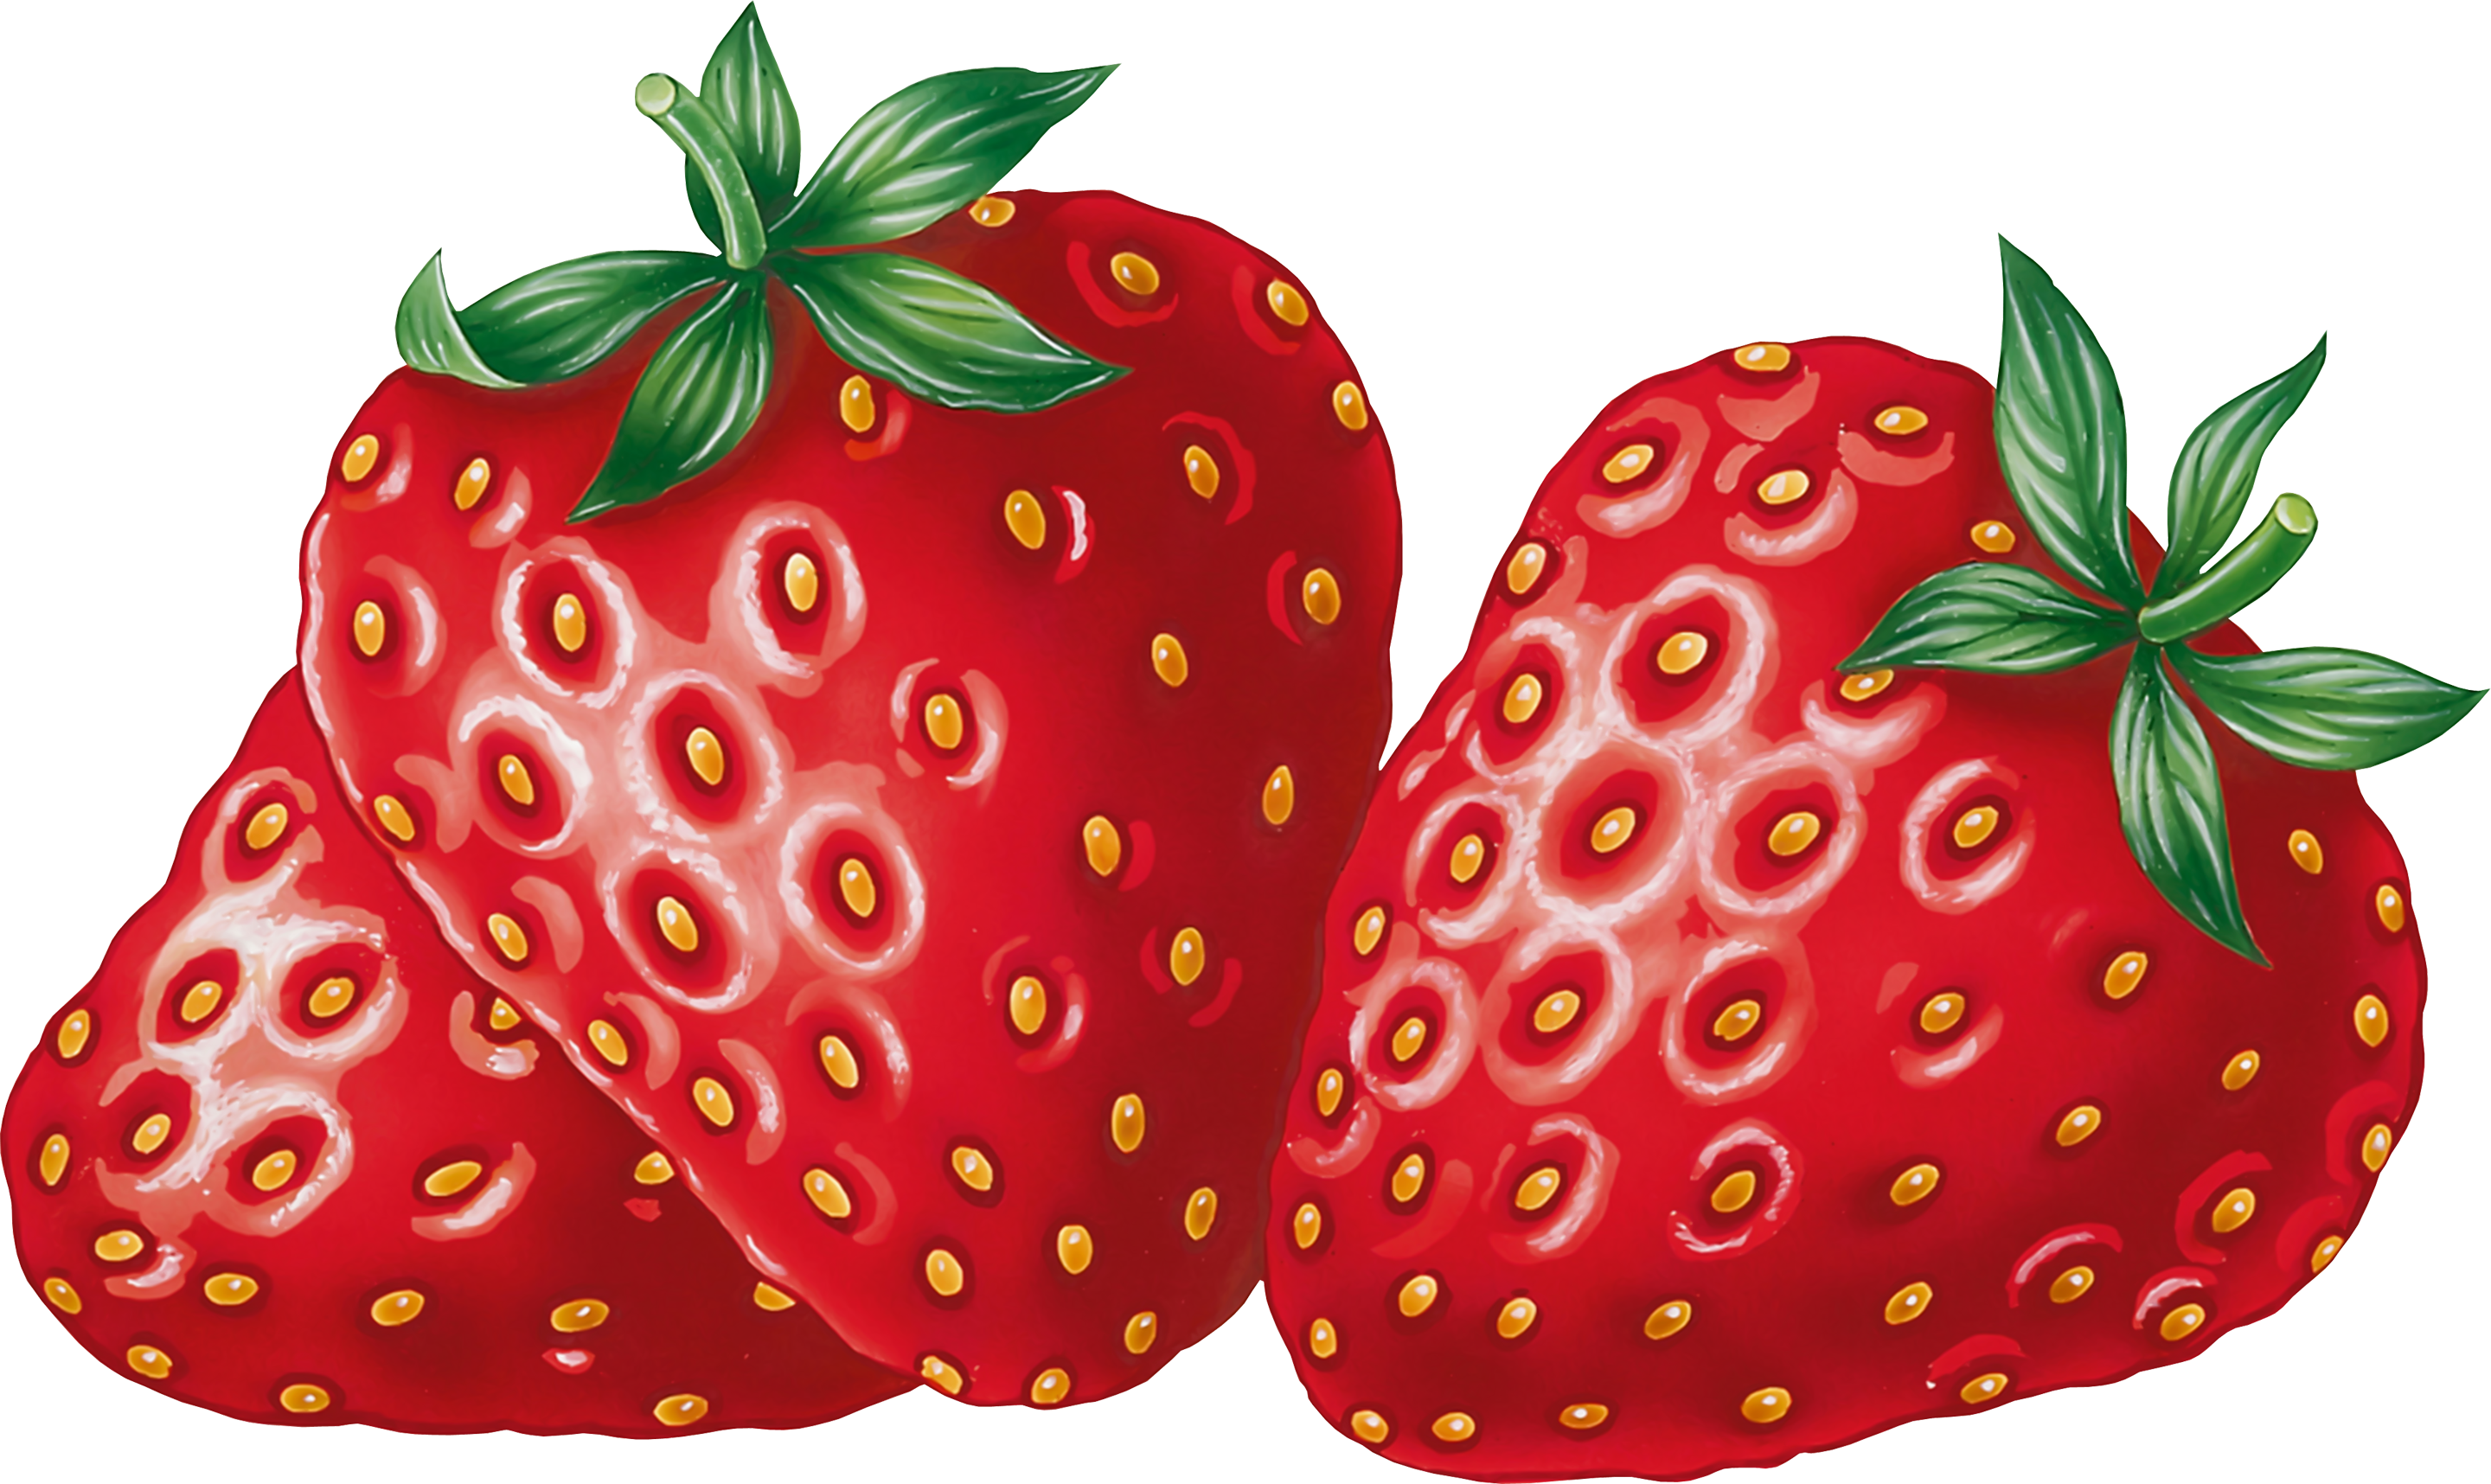 Strawberry farmer strawberries clipart free clip art images image